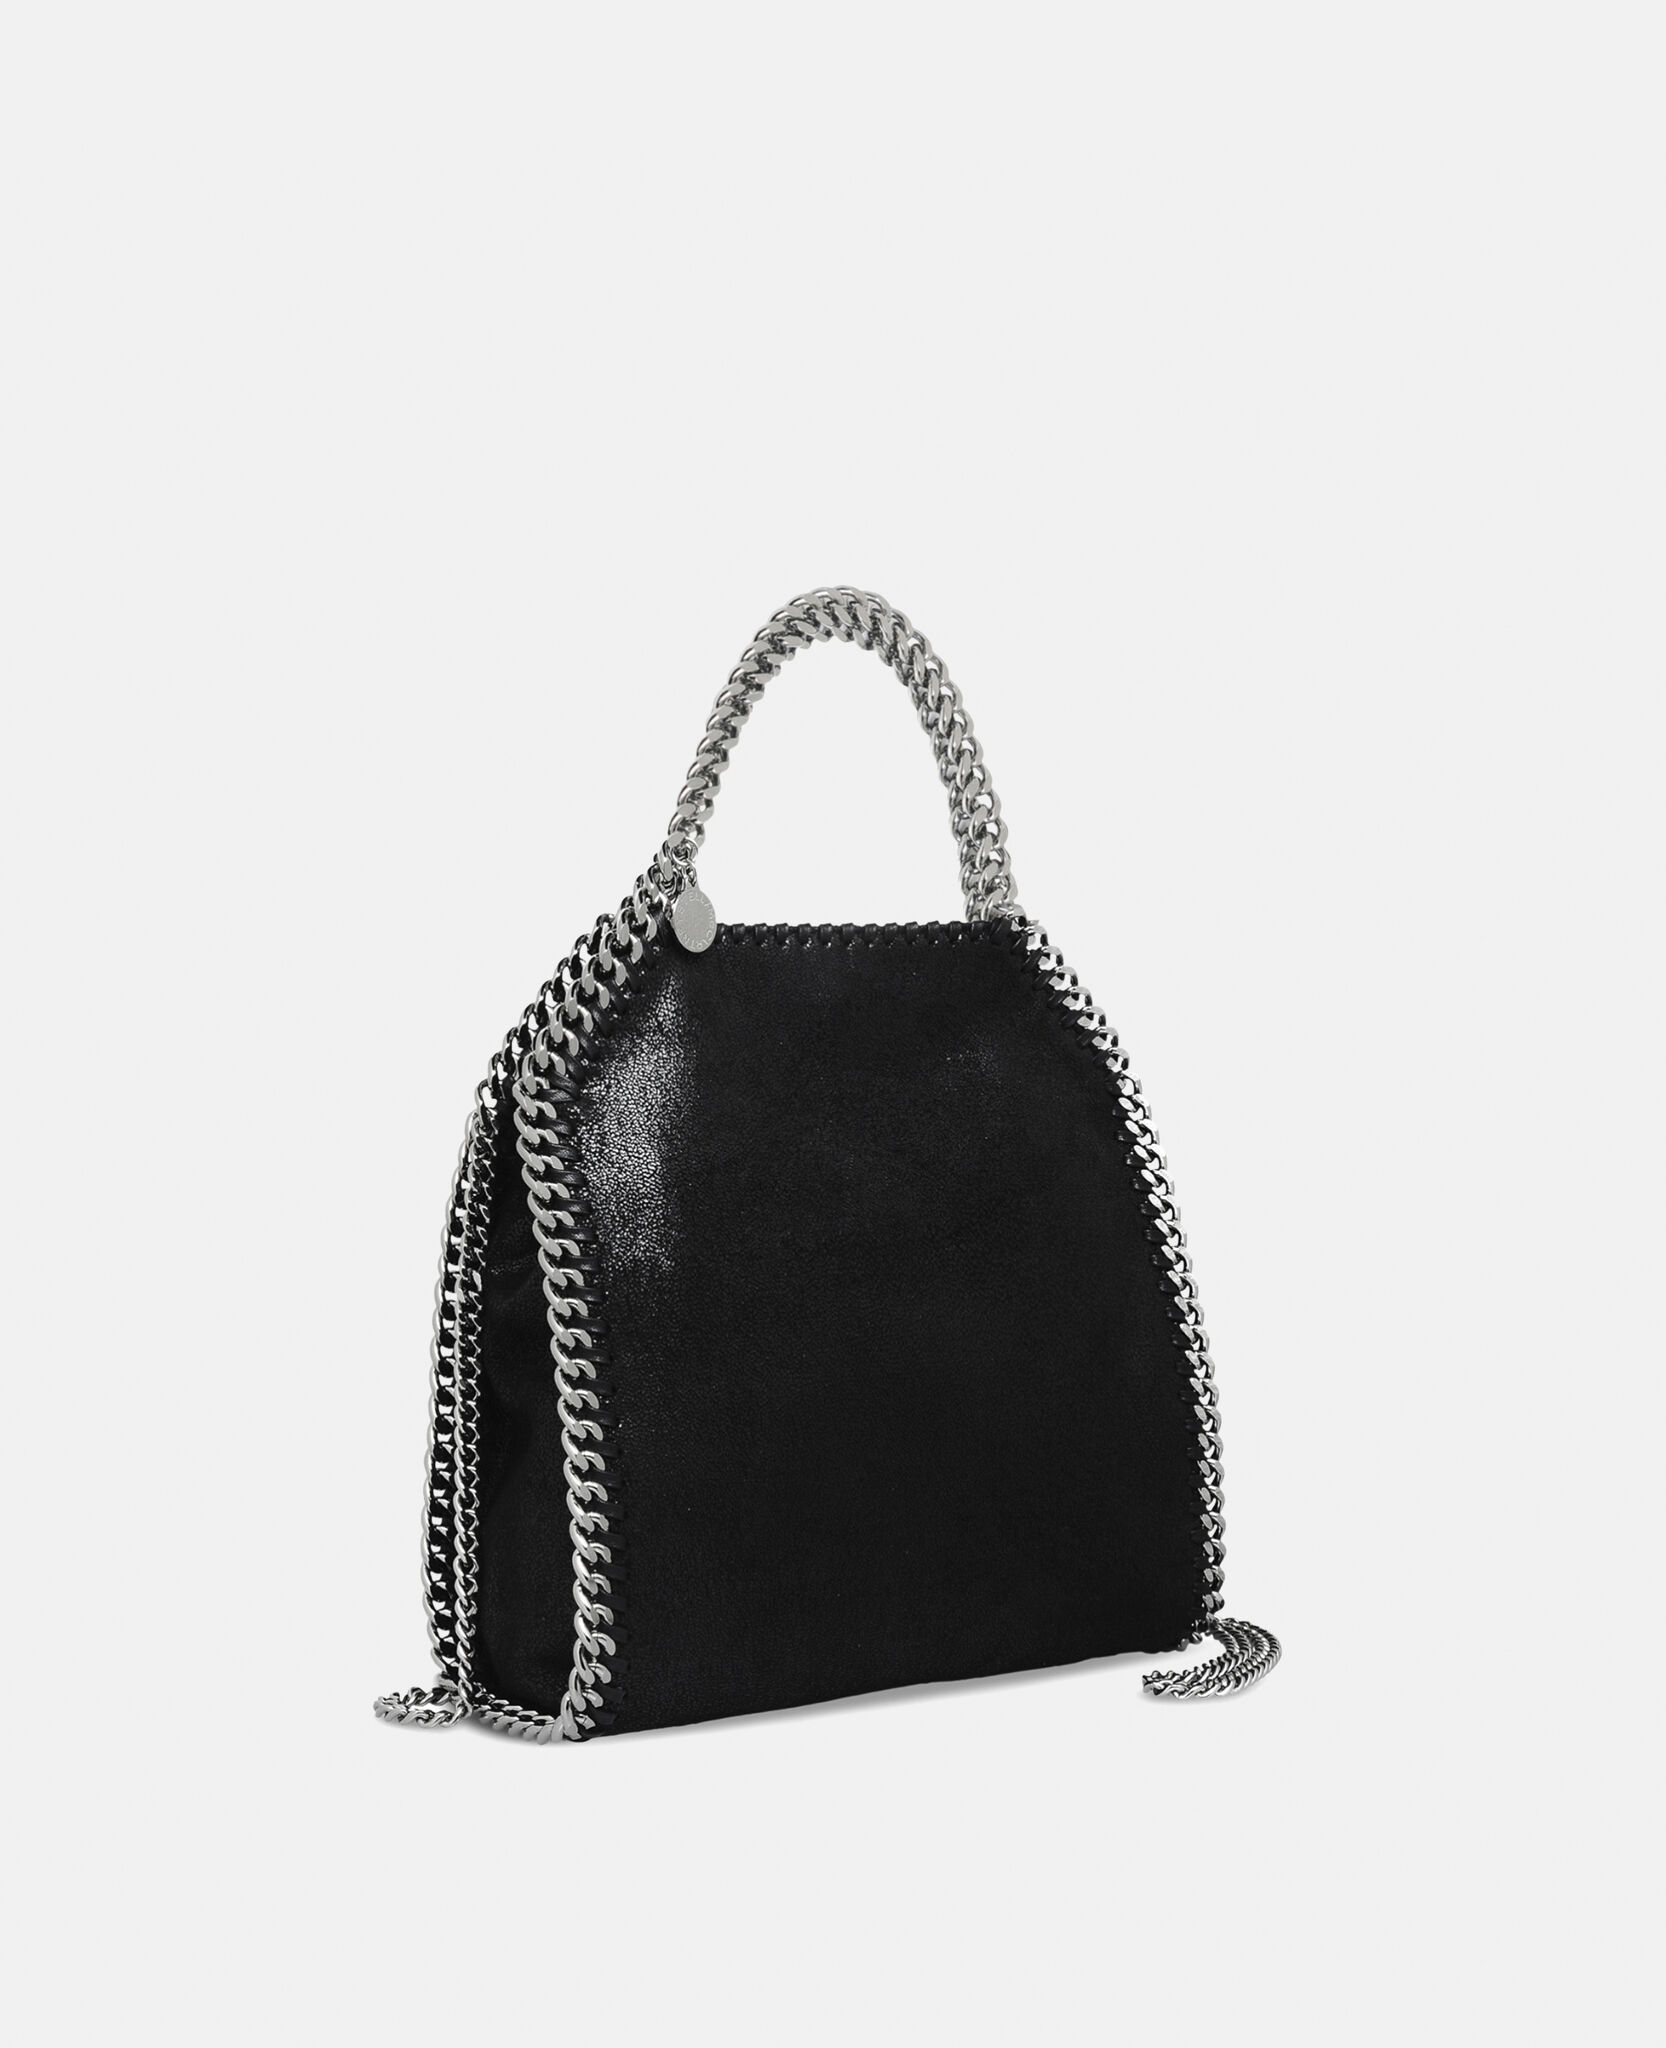 The Frayme Mylo™️, the world's first luxury handbag made from mycelium